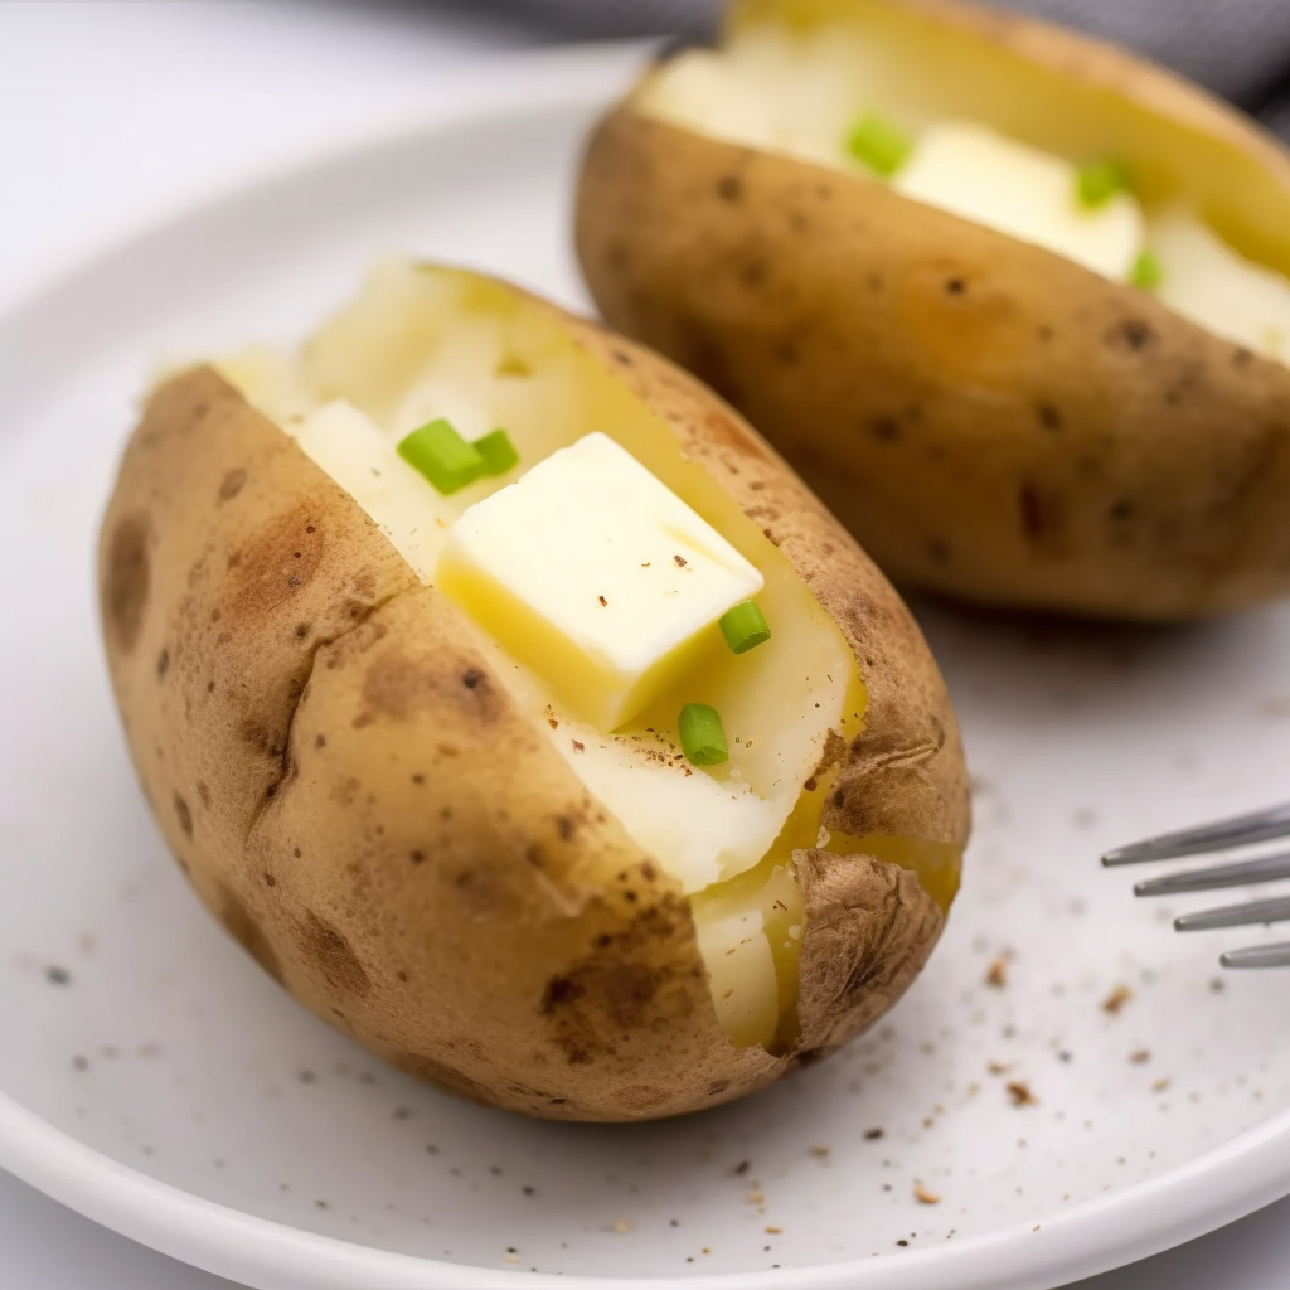 Master the art of making the perfect microwave baked potato with our simple guide. It's quick, easy, and absolutely delicious! Pin this for an effortless meal idea.